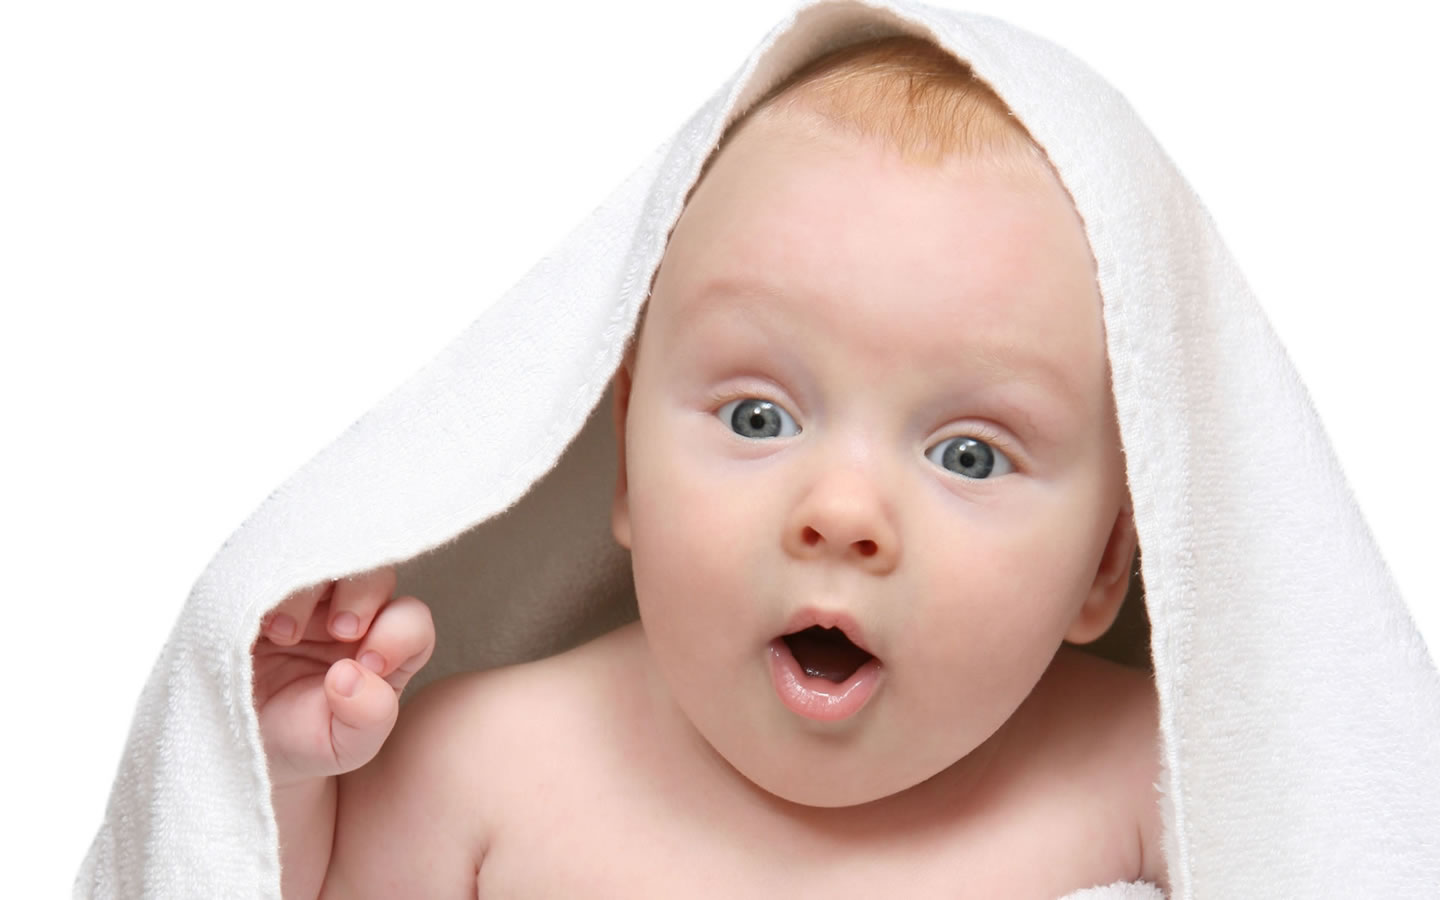 free baby wallpapers baby wallpapers cute baby wallpapers baby images ...